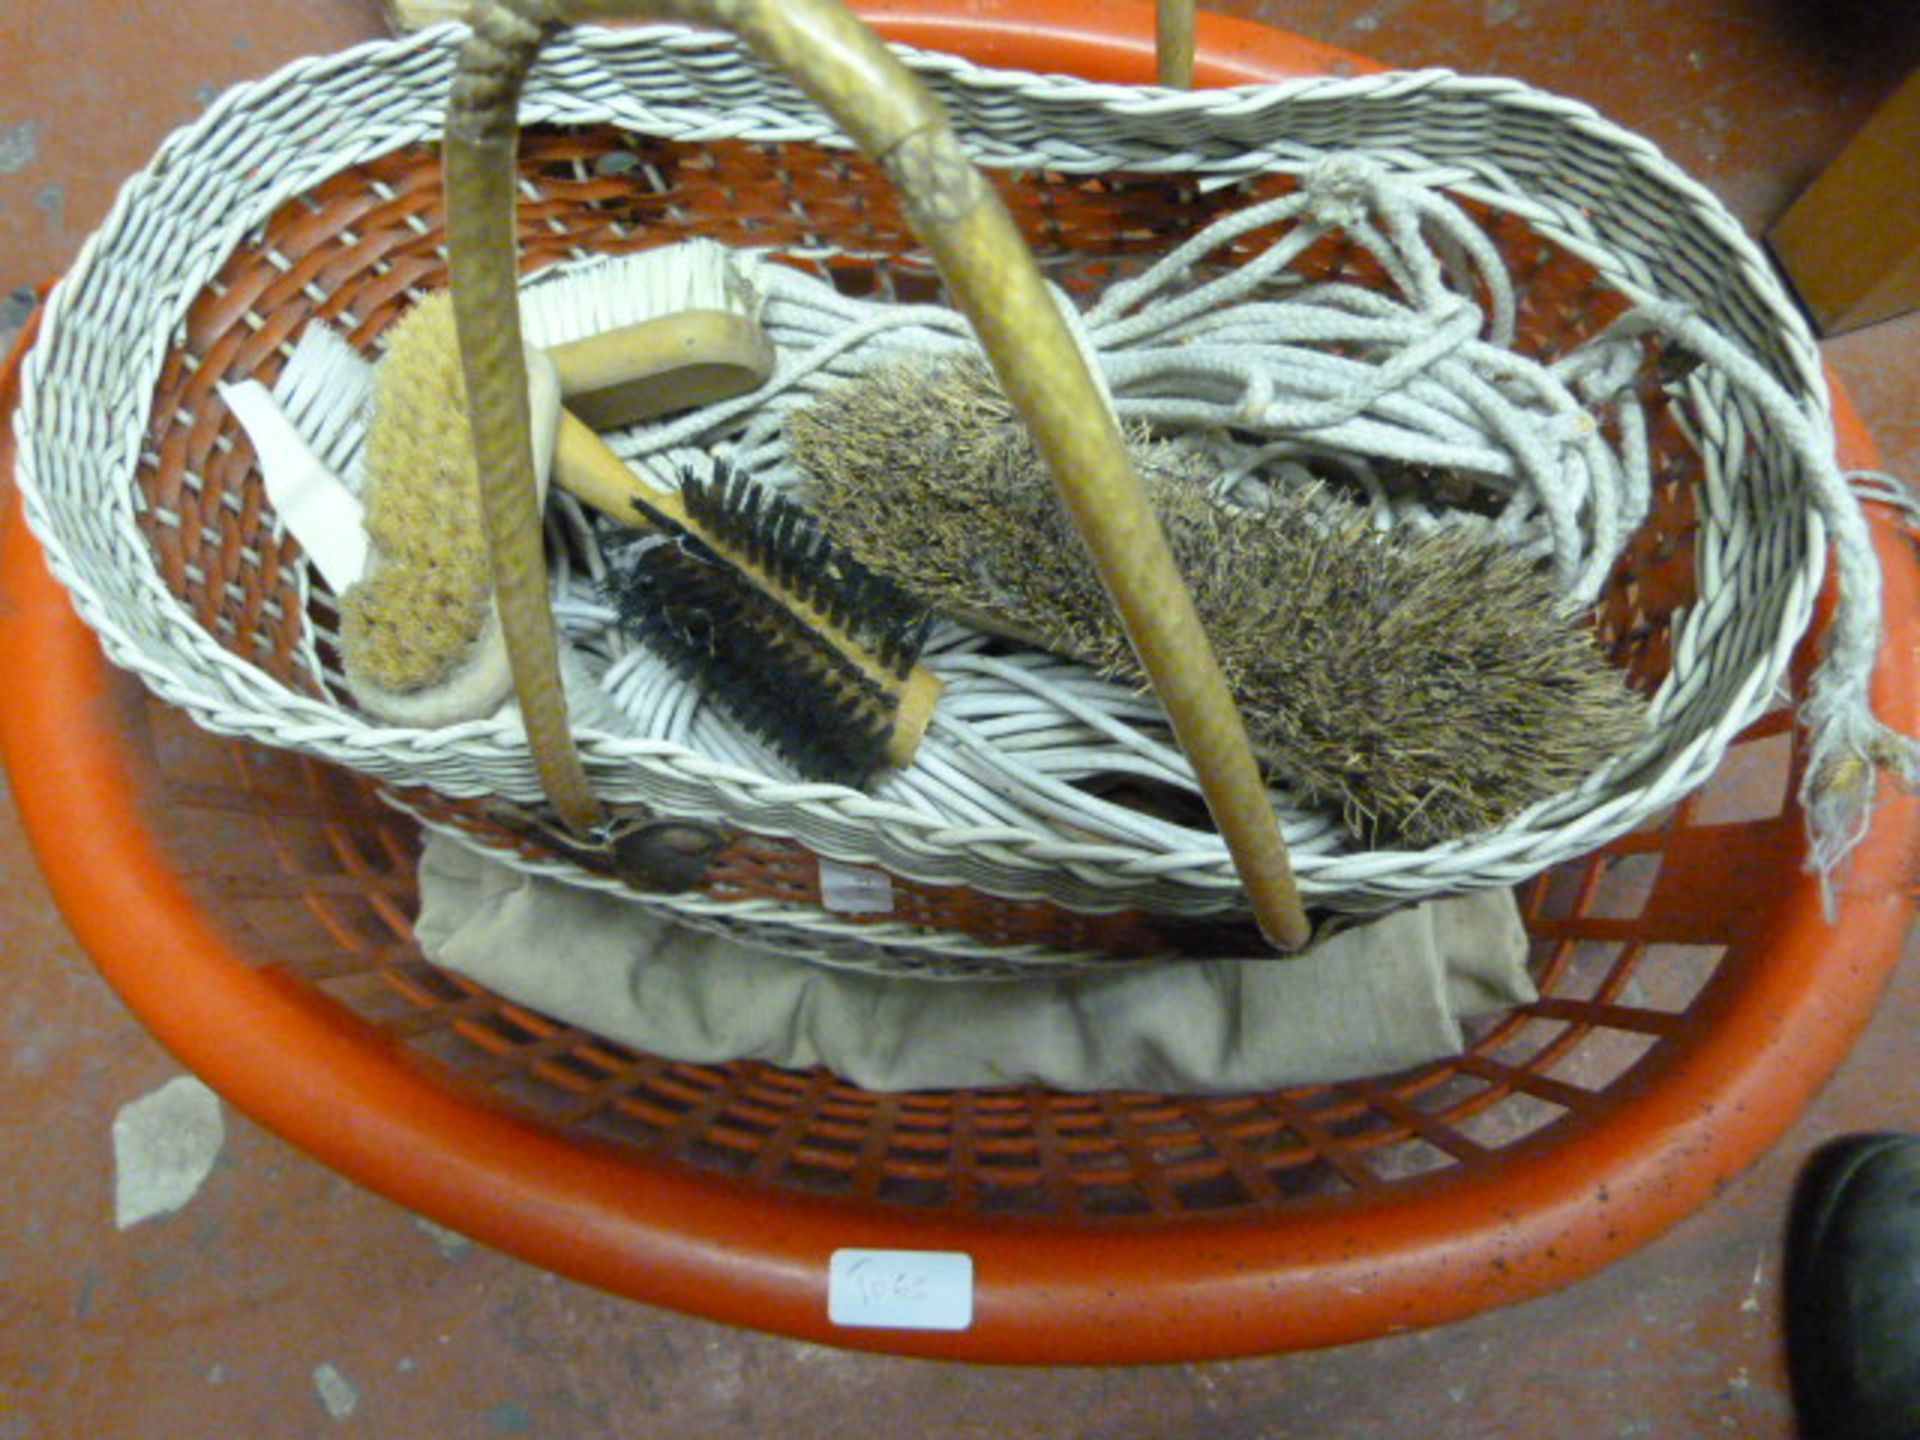 Basket of Clothes Pegs, Clothesline, Brushes, etc.